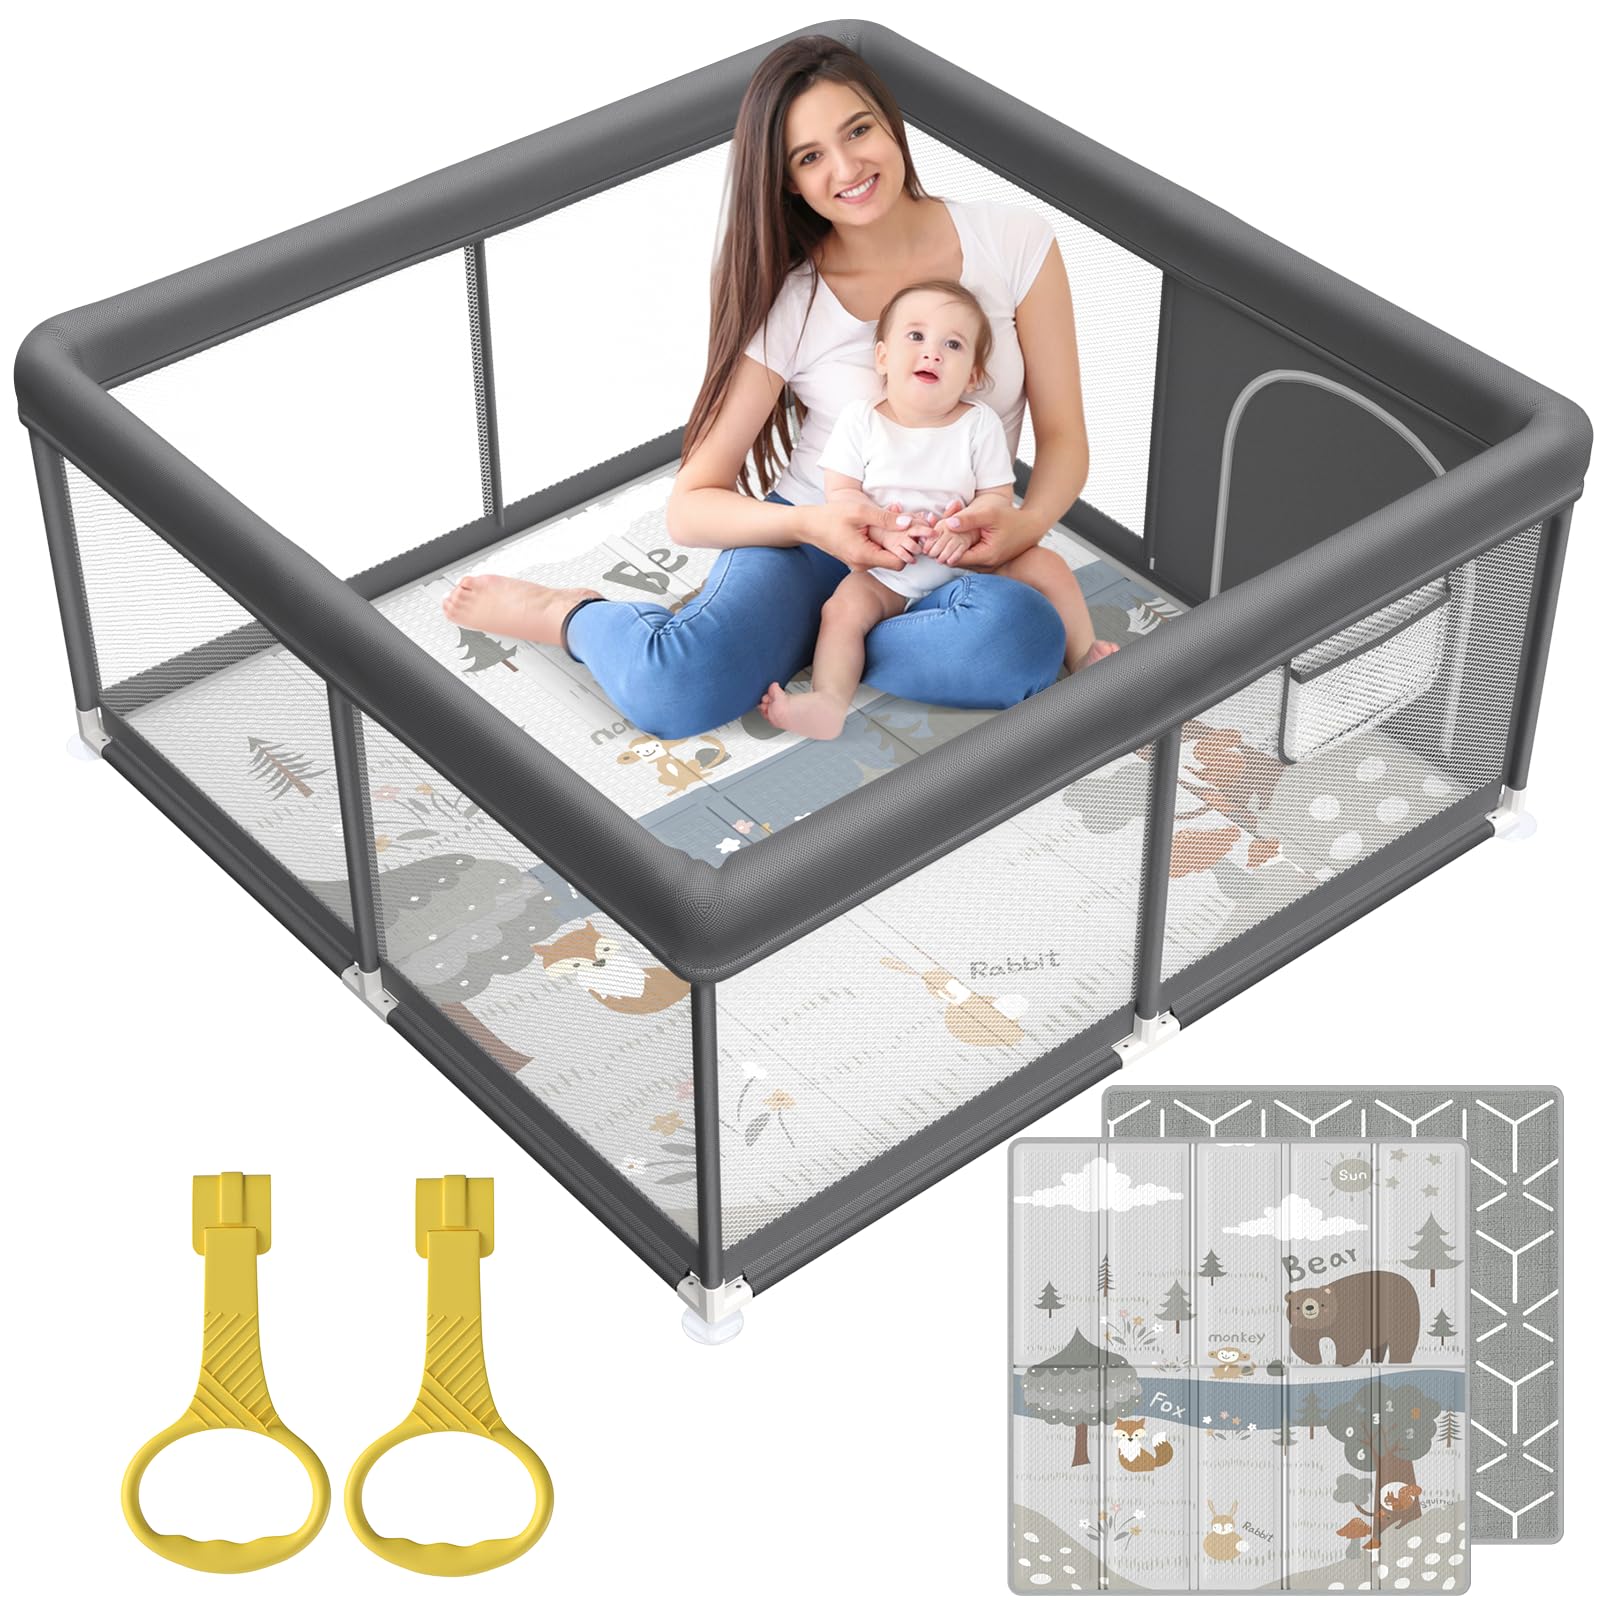 Fodoss Baby Playpen with Mat, Small Play Pen(47x47inch), for Babies and Toddlers, Pen Apartment, Yard Baby, Fence Area Playyard Activity Center (Dark Gray)